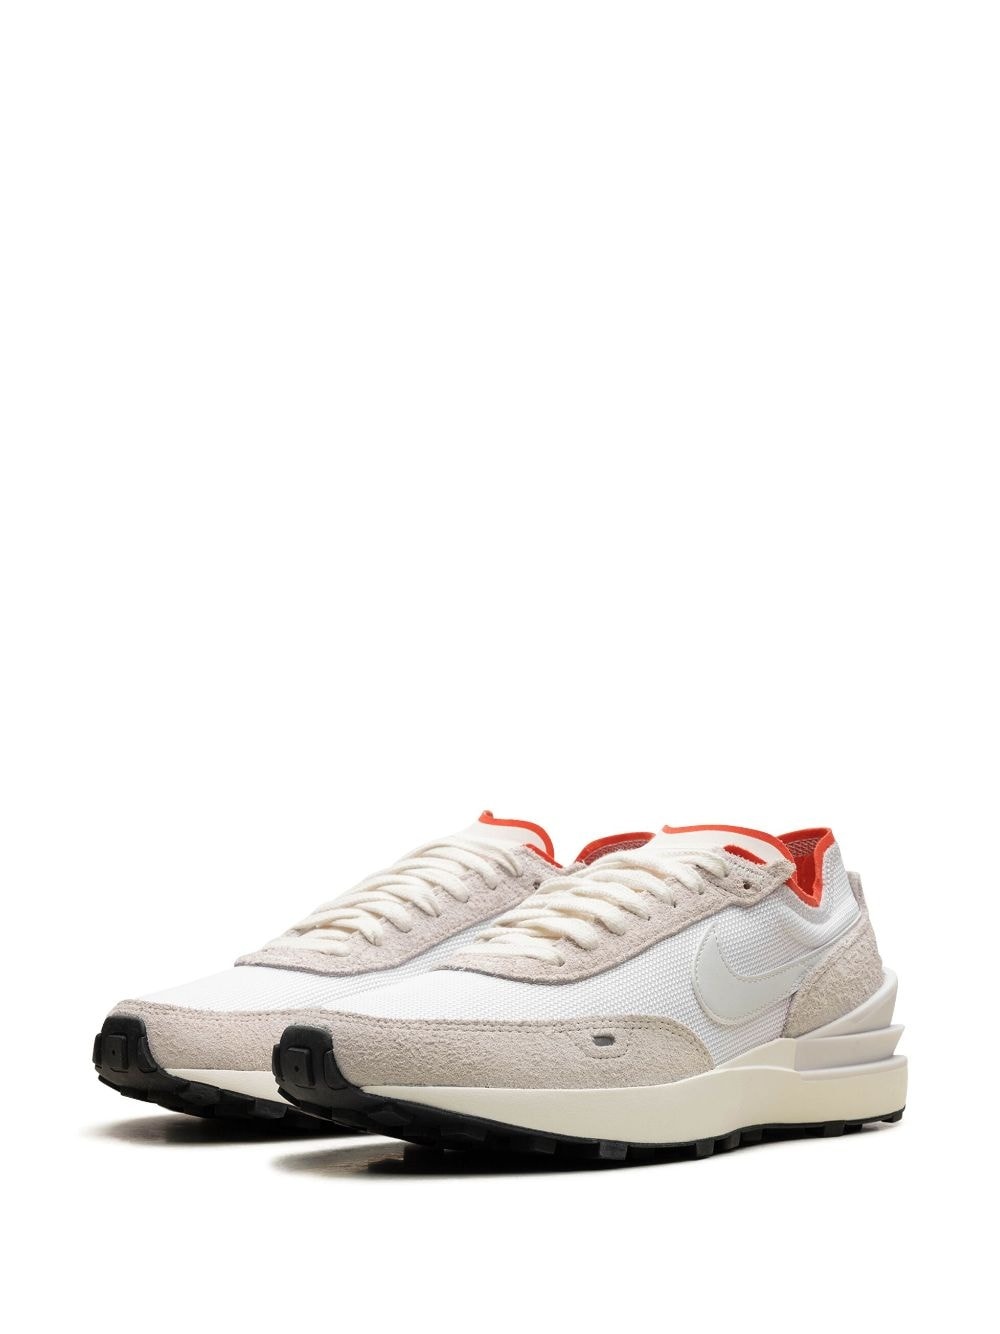 Waffle One Vintage "White Picante Red" sneakers - 6